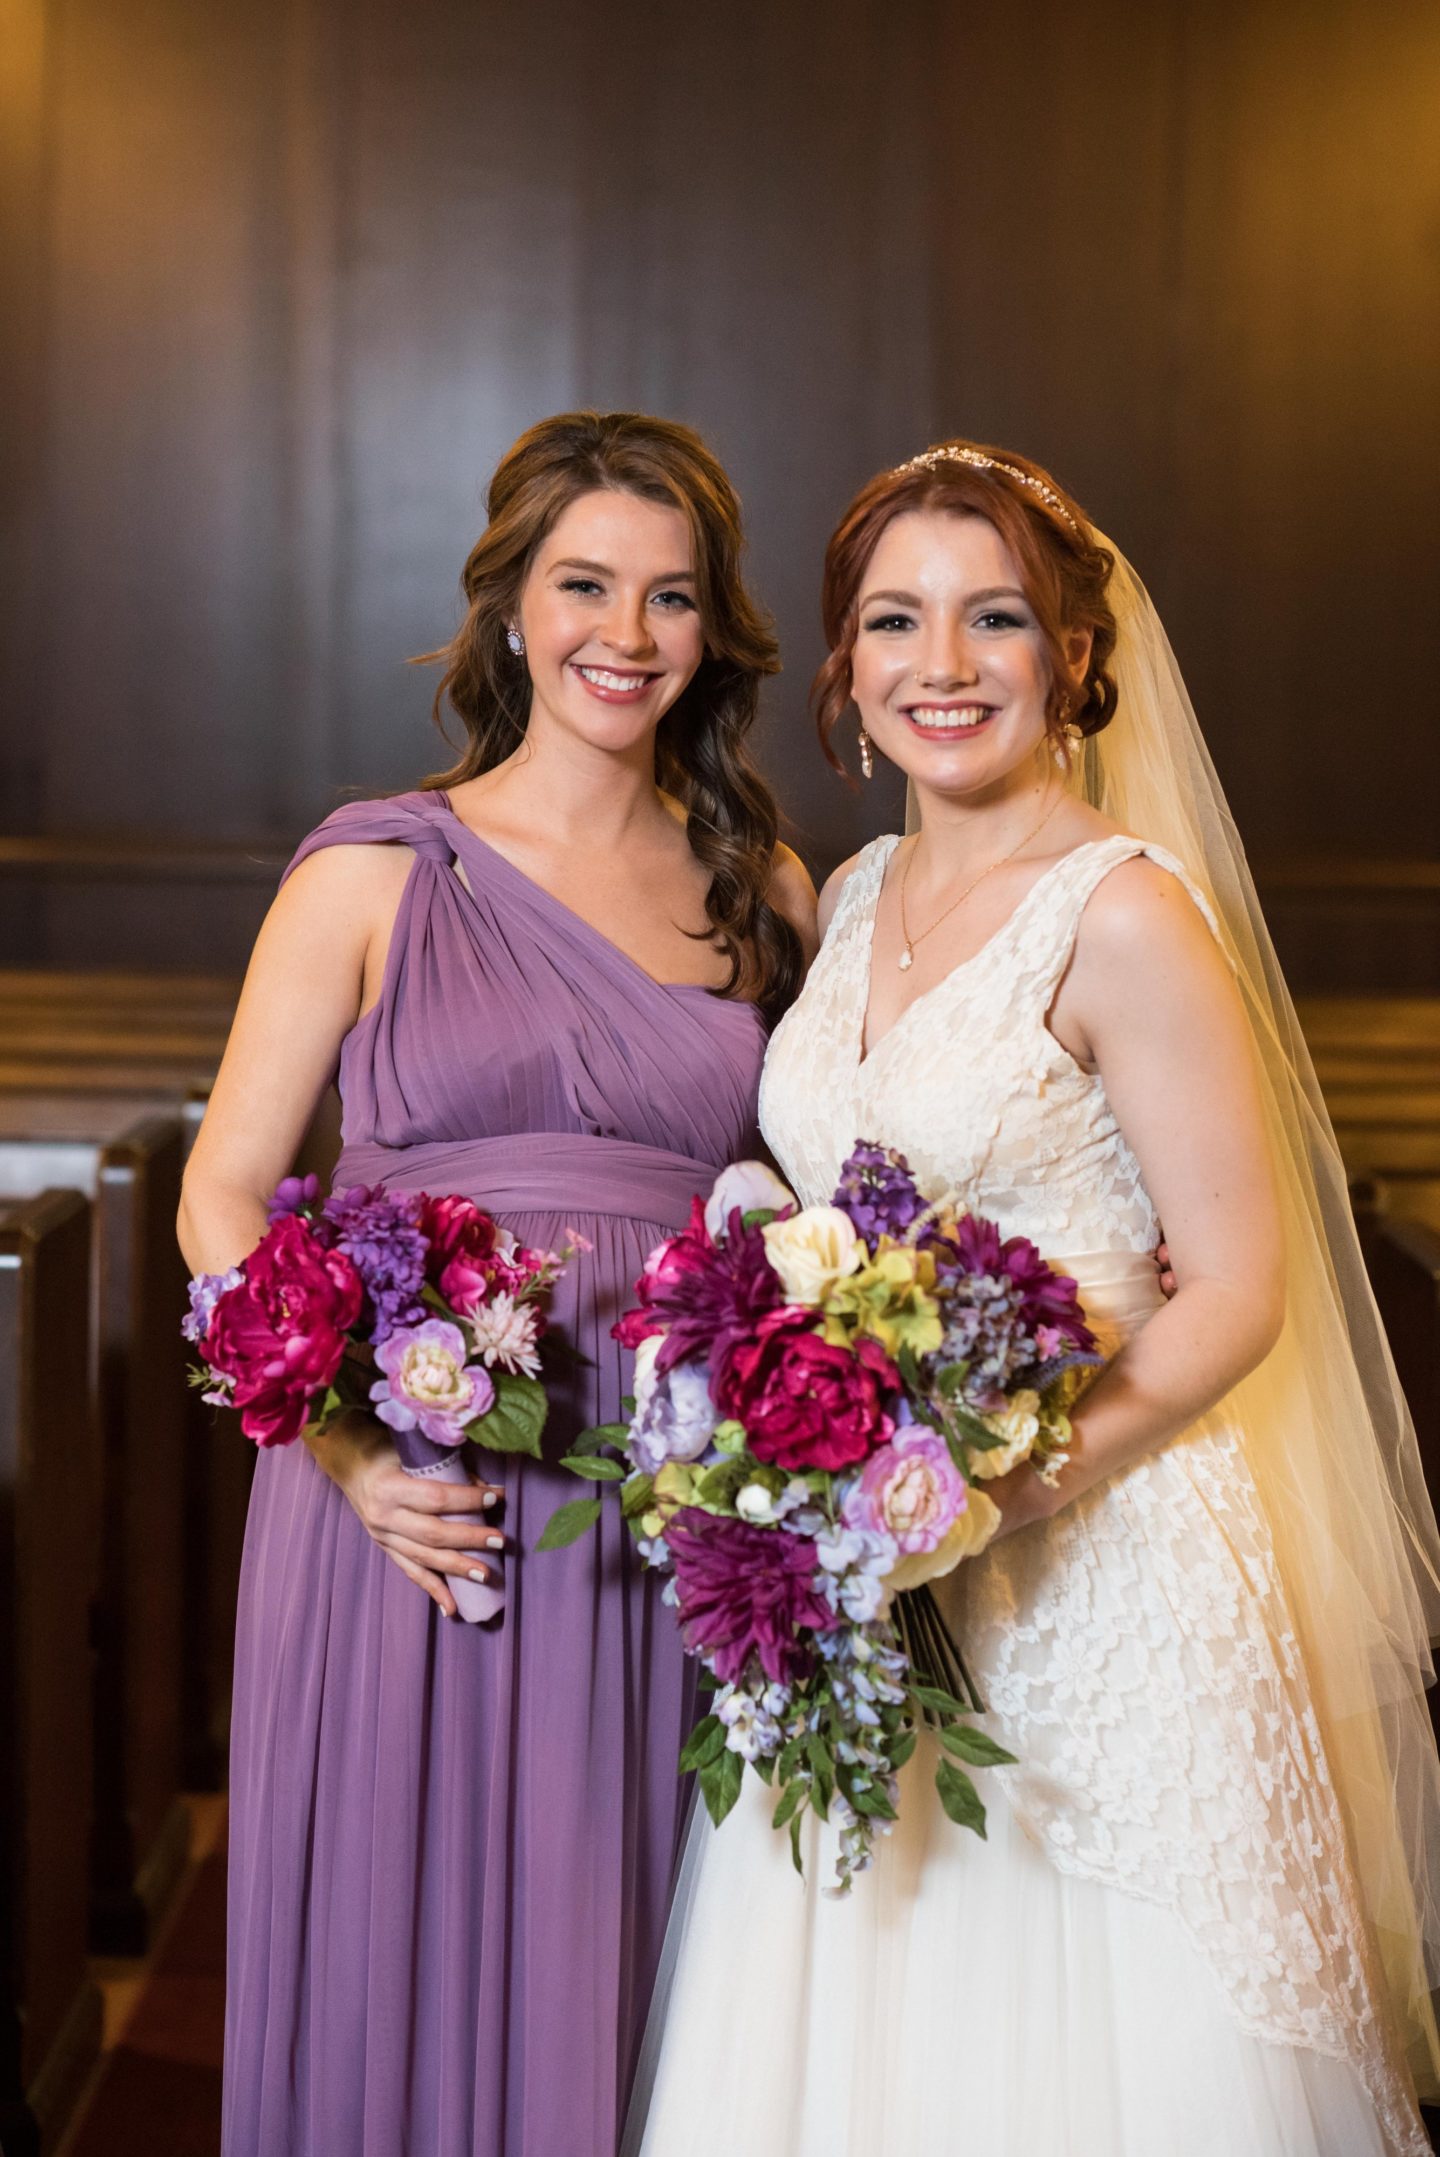 Crafting Your Wedding: The Easiest Way to Make Affordable Bridal and Bridesmaid Bouquets